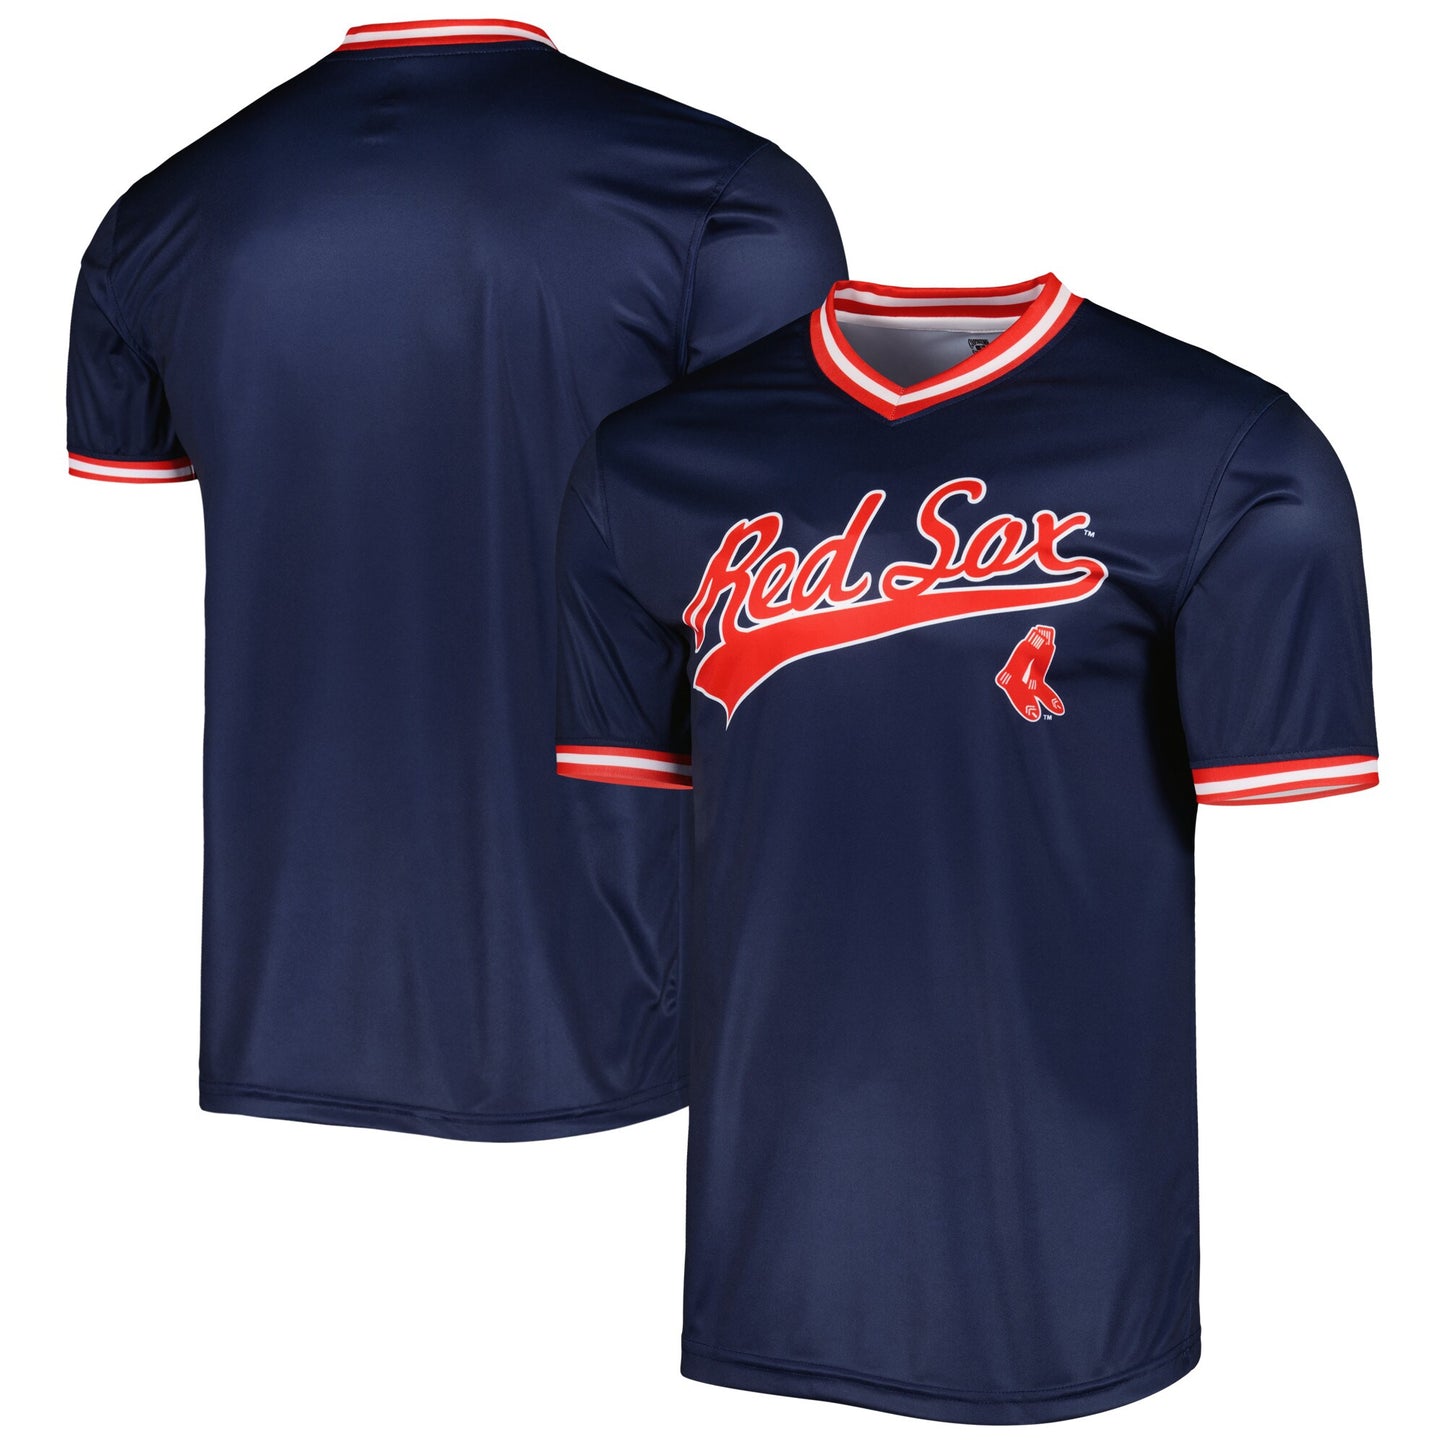 Boston Red Sox Stitches Cooperstown Collection Team Jersey - Navy